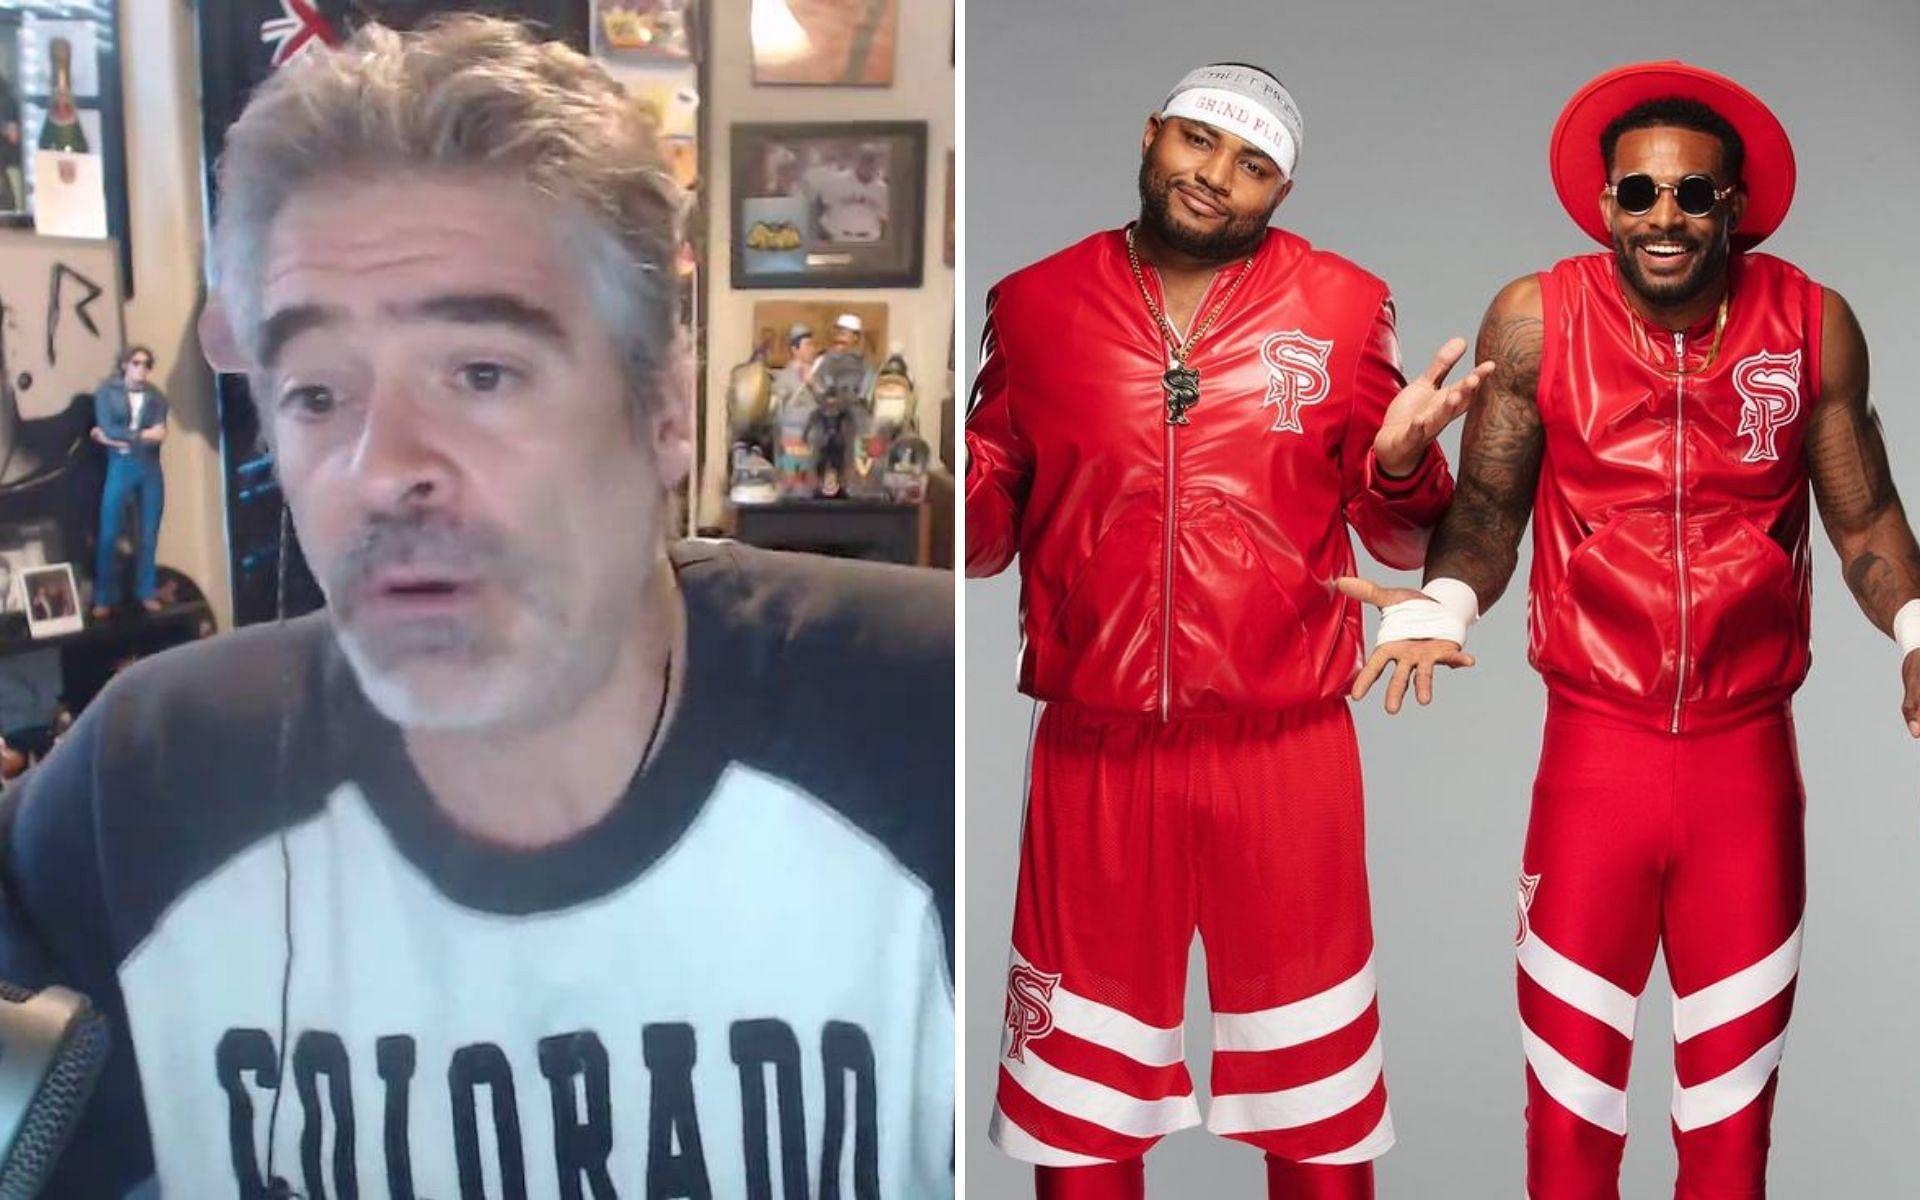 Why does the ex-WWE writer think The Street Profits and others are racial stereotype?